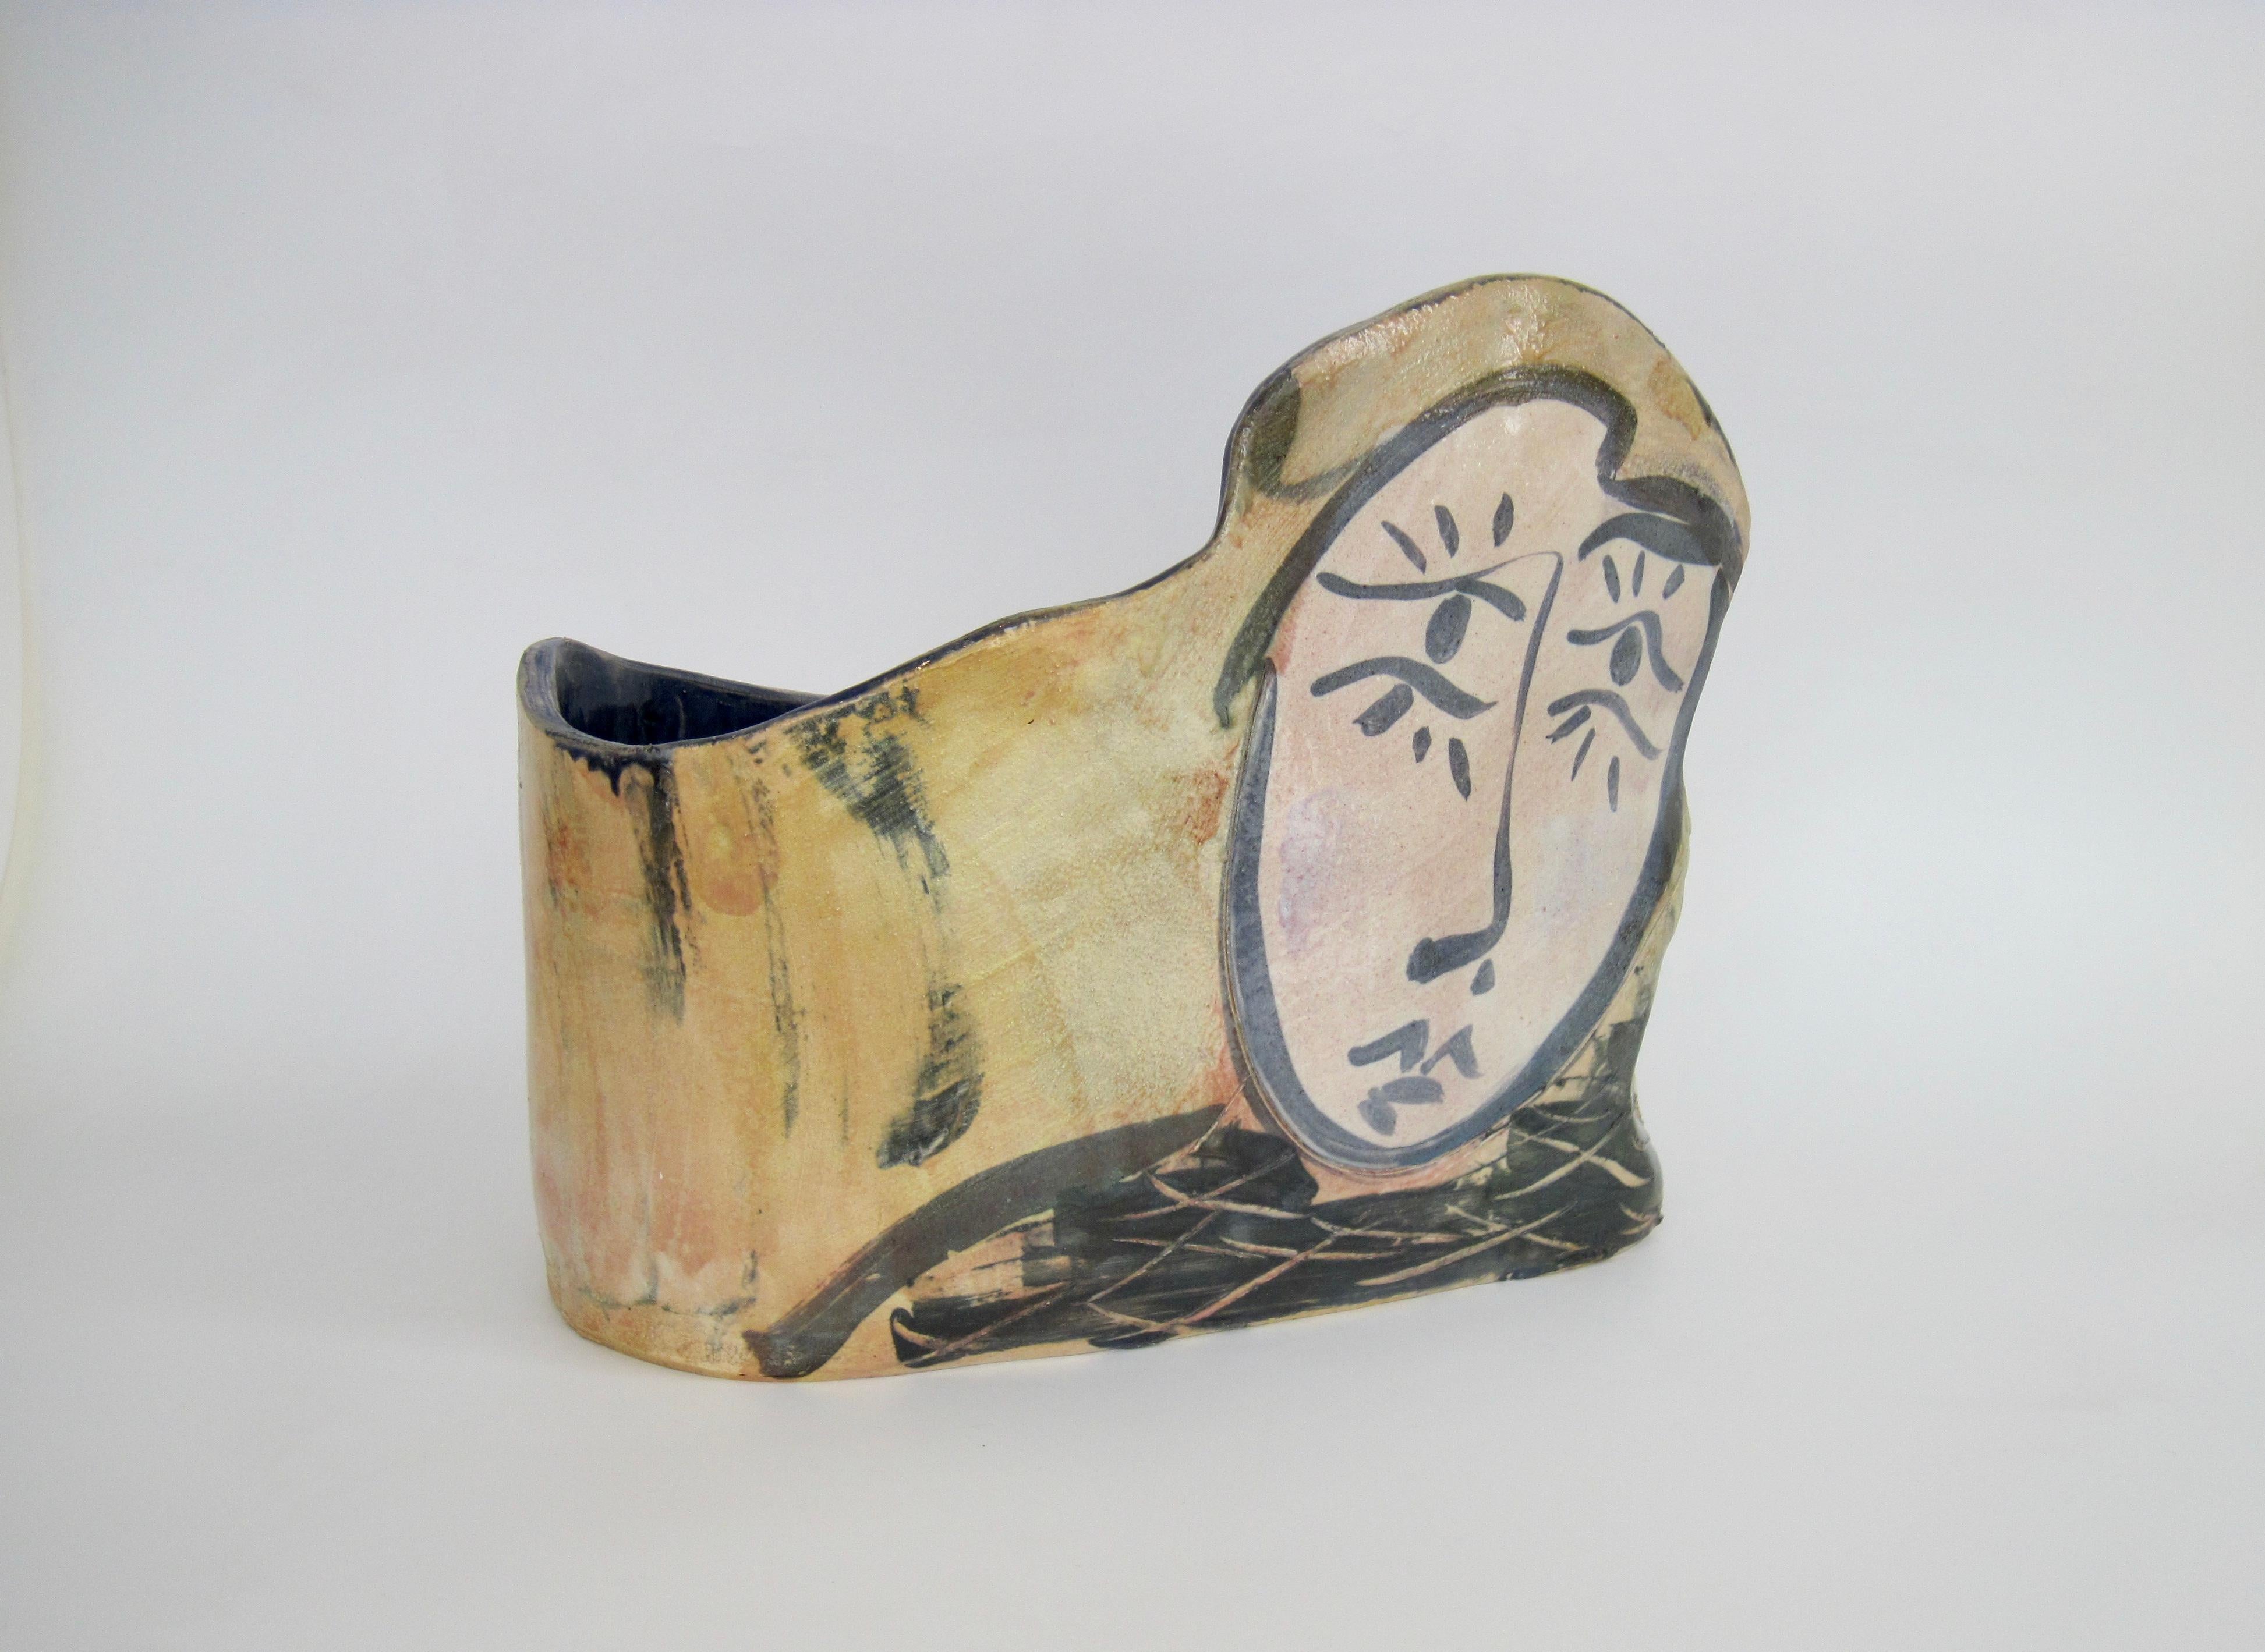 Hand signed studio constructed slab pottery after Picasso as a magazine holder, planter, or trash can. Could also be used for kindling next to a fireplace. The oblong shape has an earth tone exterior, blue and light skin tone face and incised